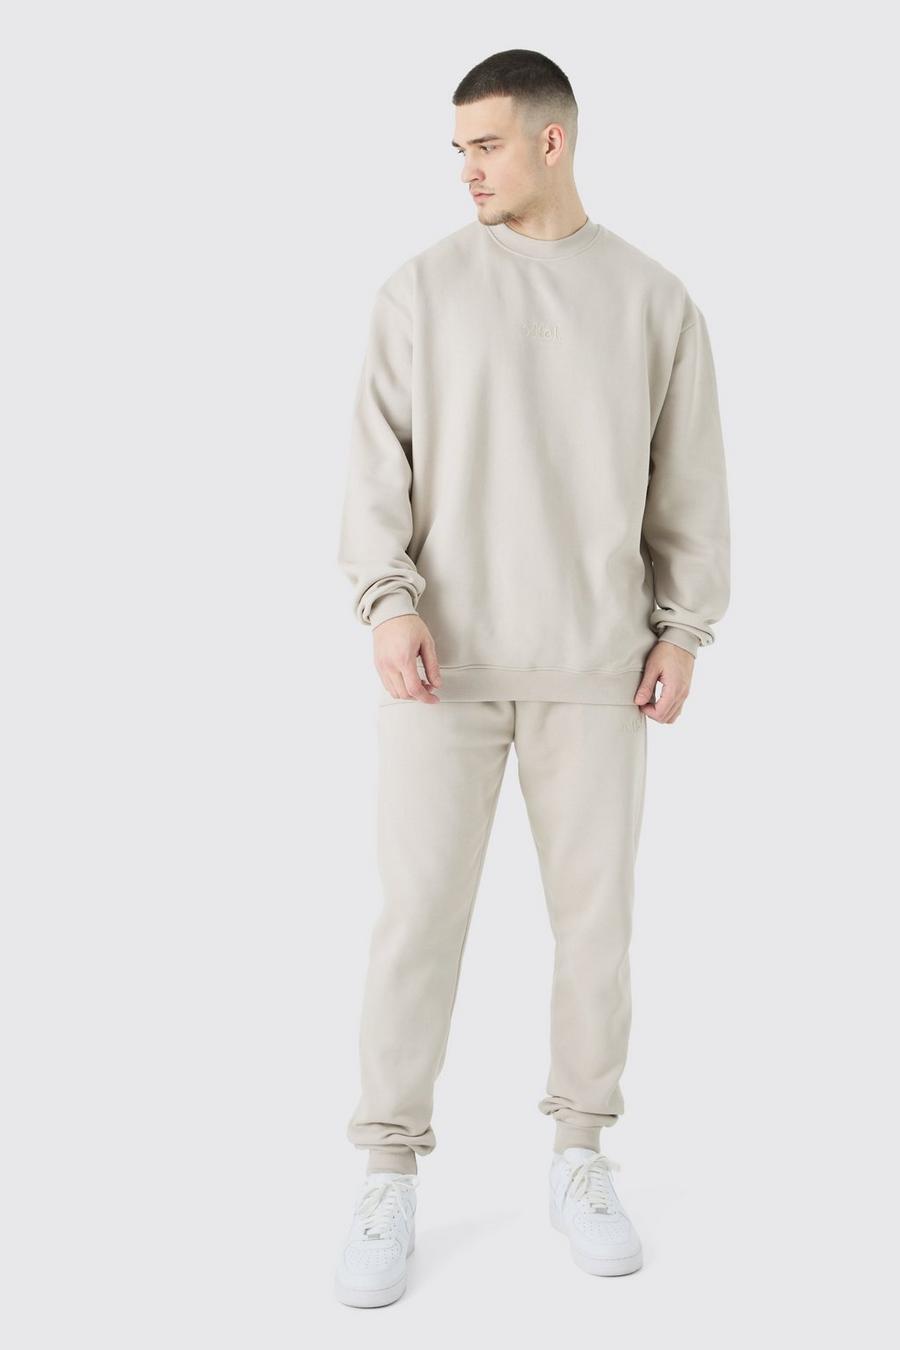 Stone beige Tall Offcl Oversized Extended Neck Sweatshirt Tracksuit